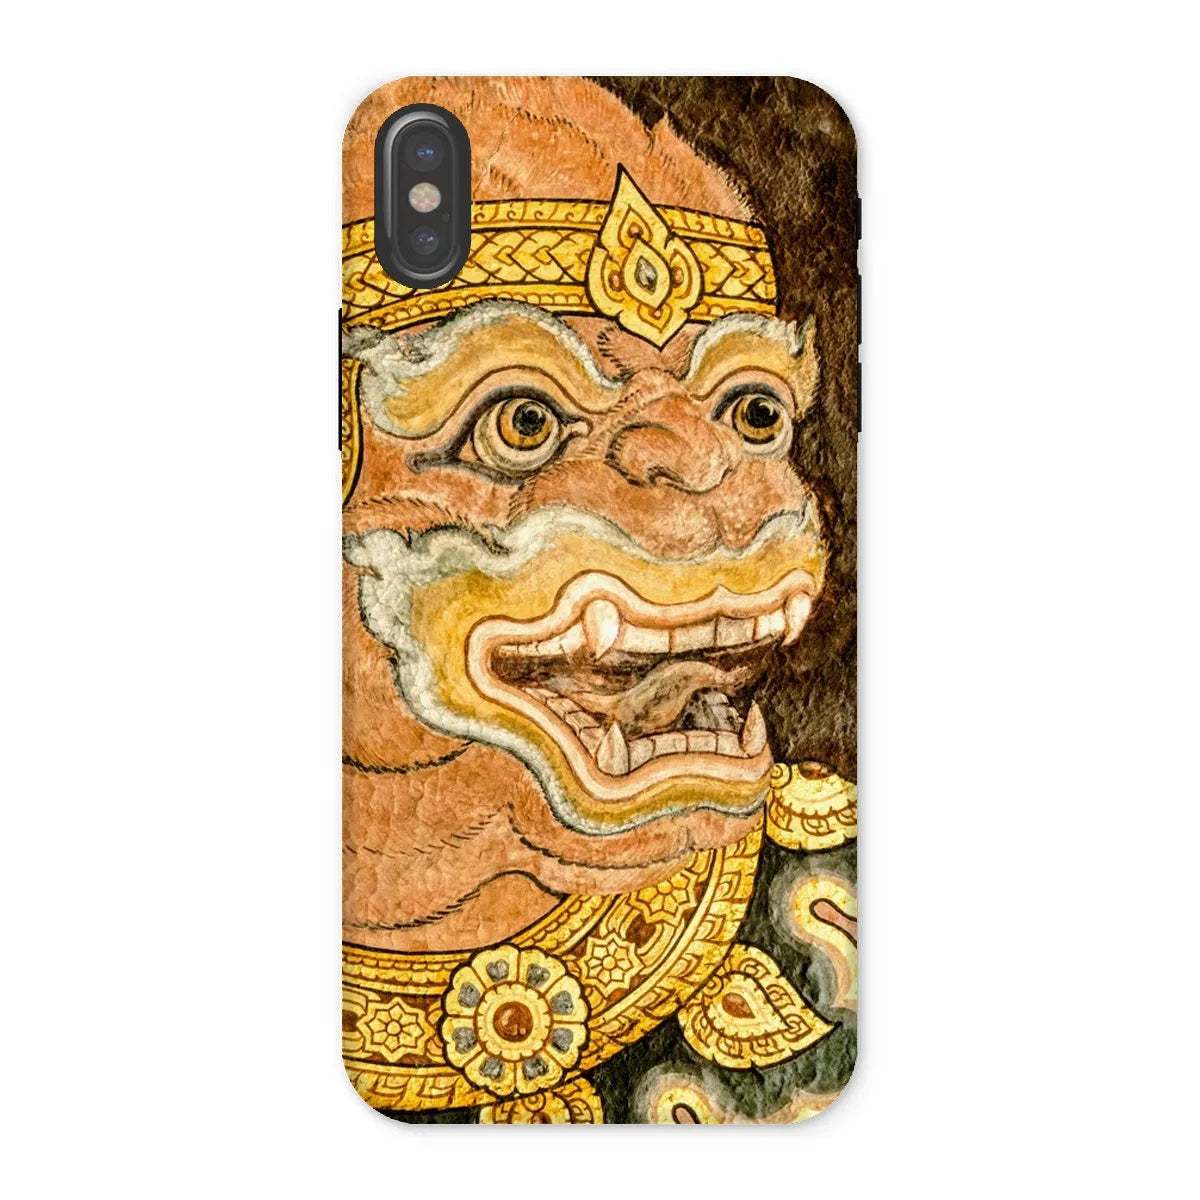 Monkey See - Traditional Thai Aesthetic Art Phone Case - Iphone x / Matte - Mobile Phone Cases - Aesthetic Art